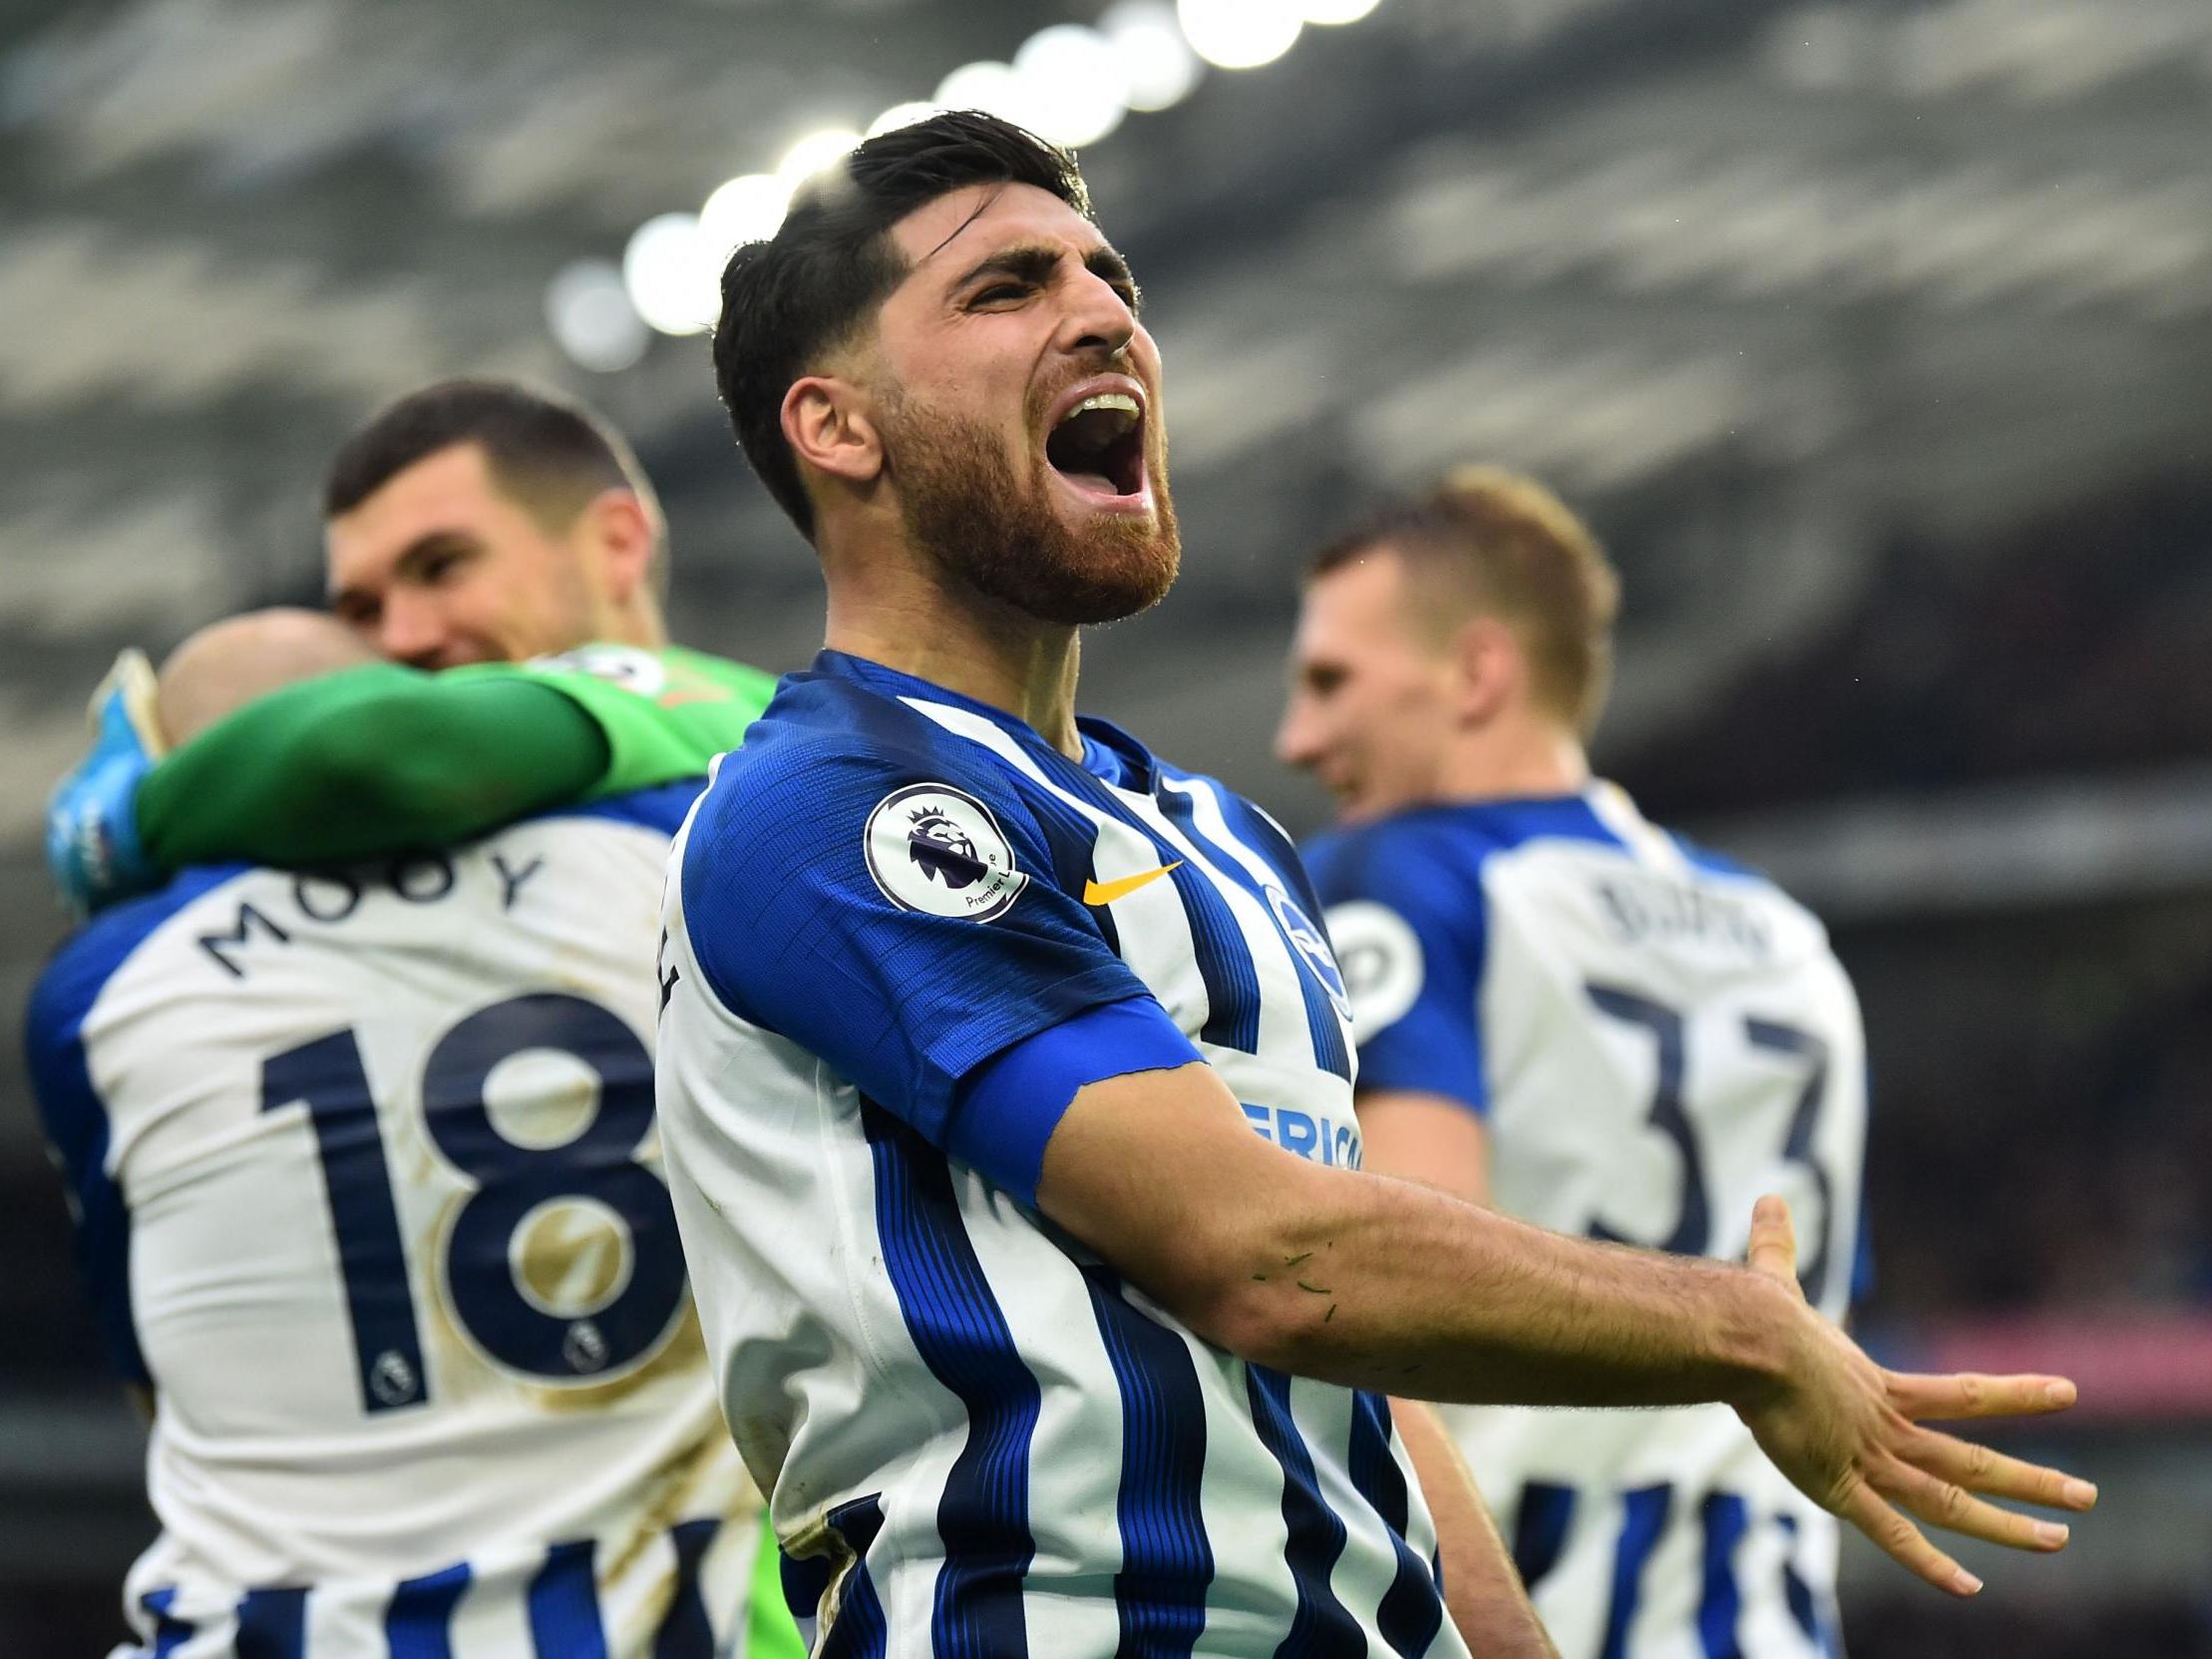 Norwich vs Brighton predicted line-ups: Team news and more for Premier League fixture today